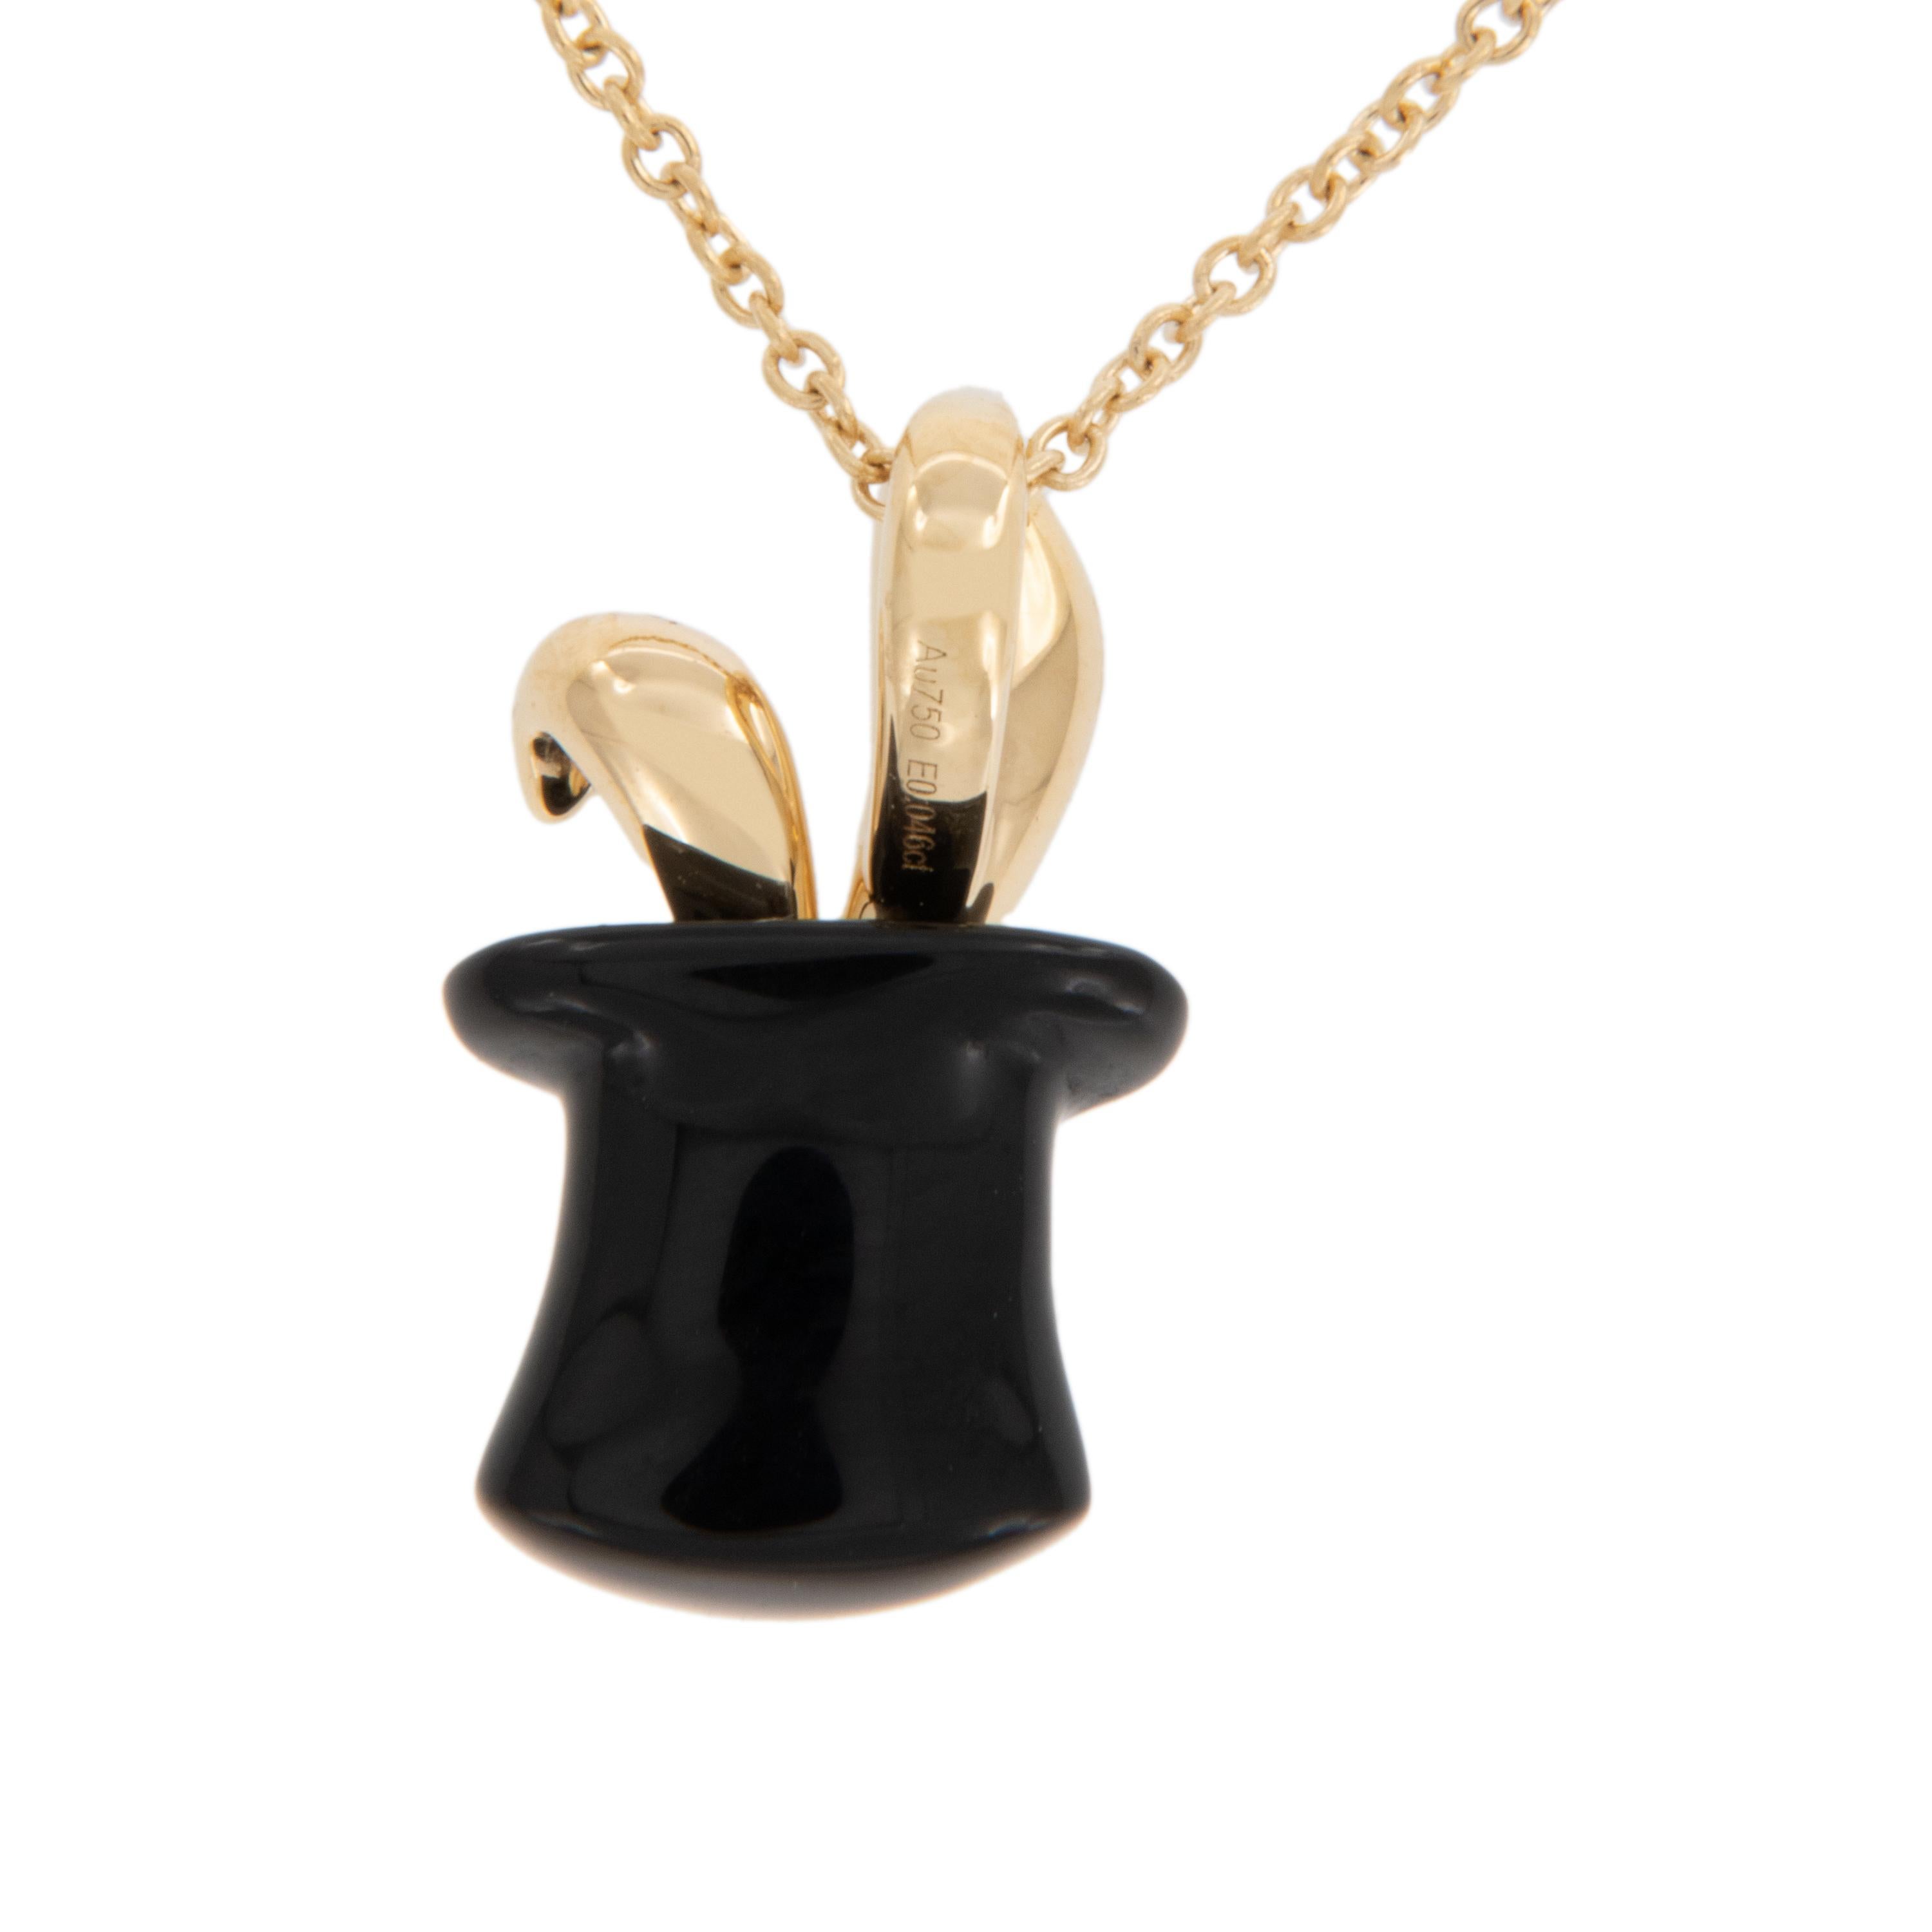 This necklace is absolute magic! No trickery here - this rabbit in a magic hat necklace looks adorable on your neck. Made from rich 18 karat yellow gold with 1.90 Carat black onyx magic hat with rabbit ears peaking through the top is accented with 1